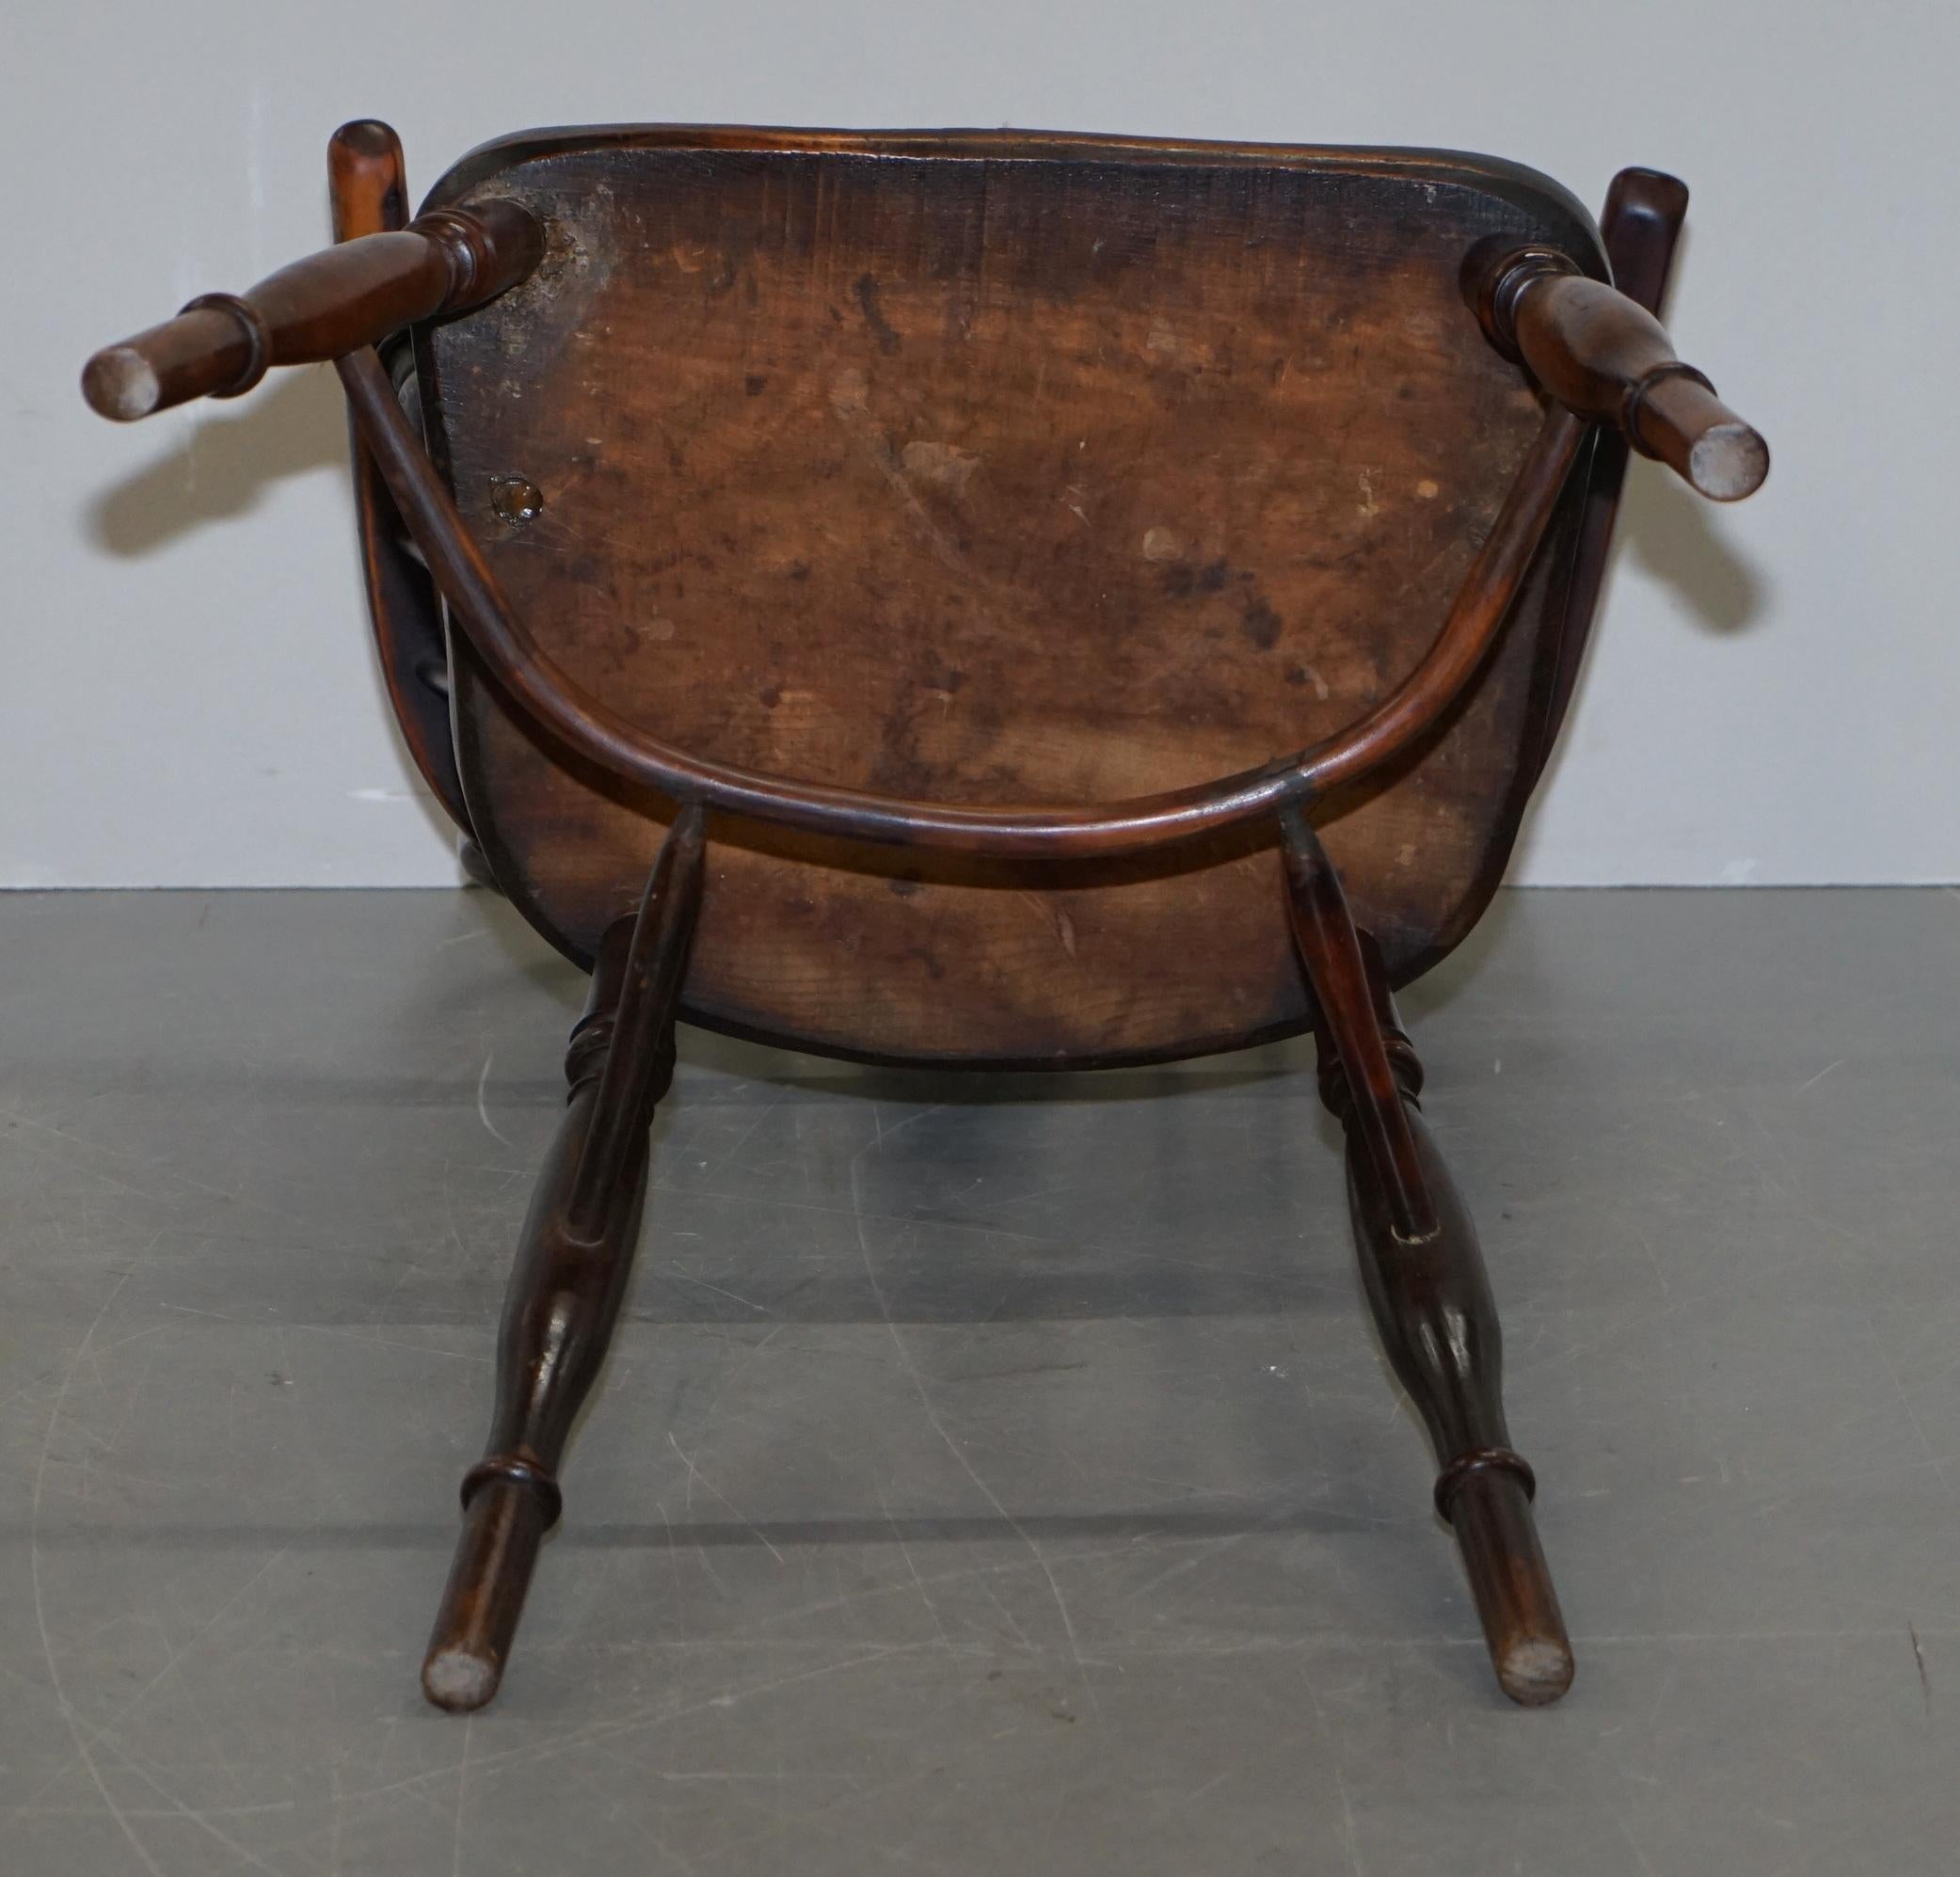 1 of 6 Burr Yew Wood and Elm Windsor Armchairs circa 1860 English Country House 14